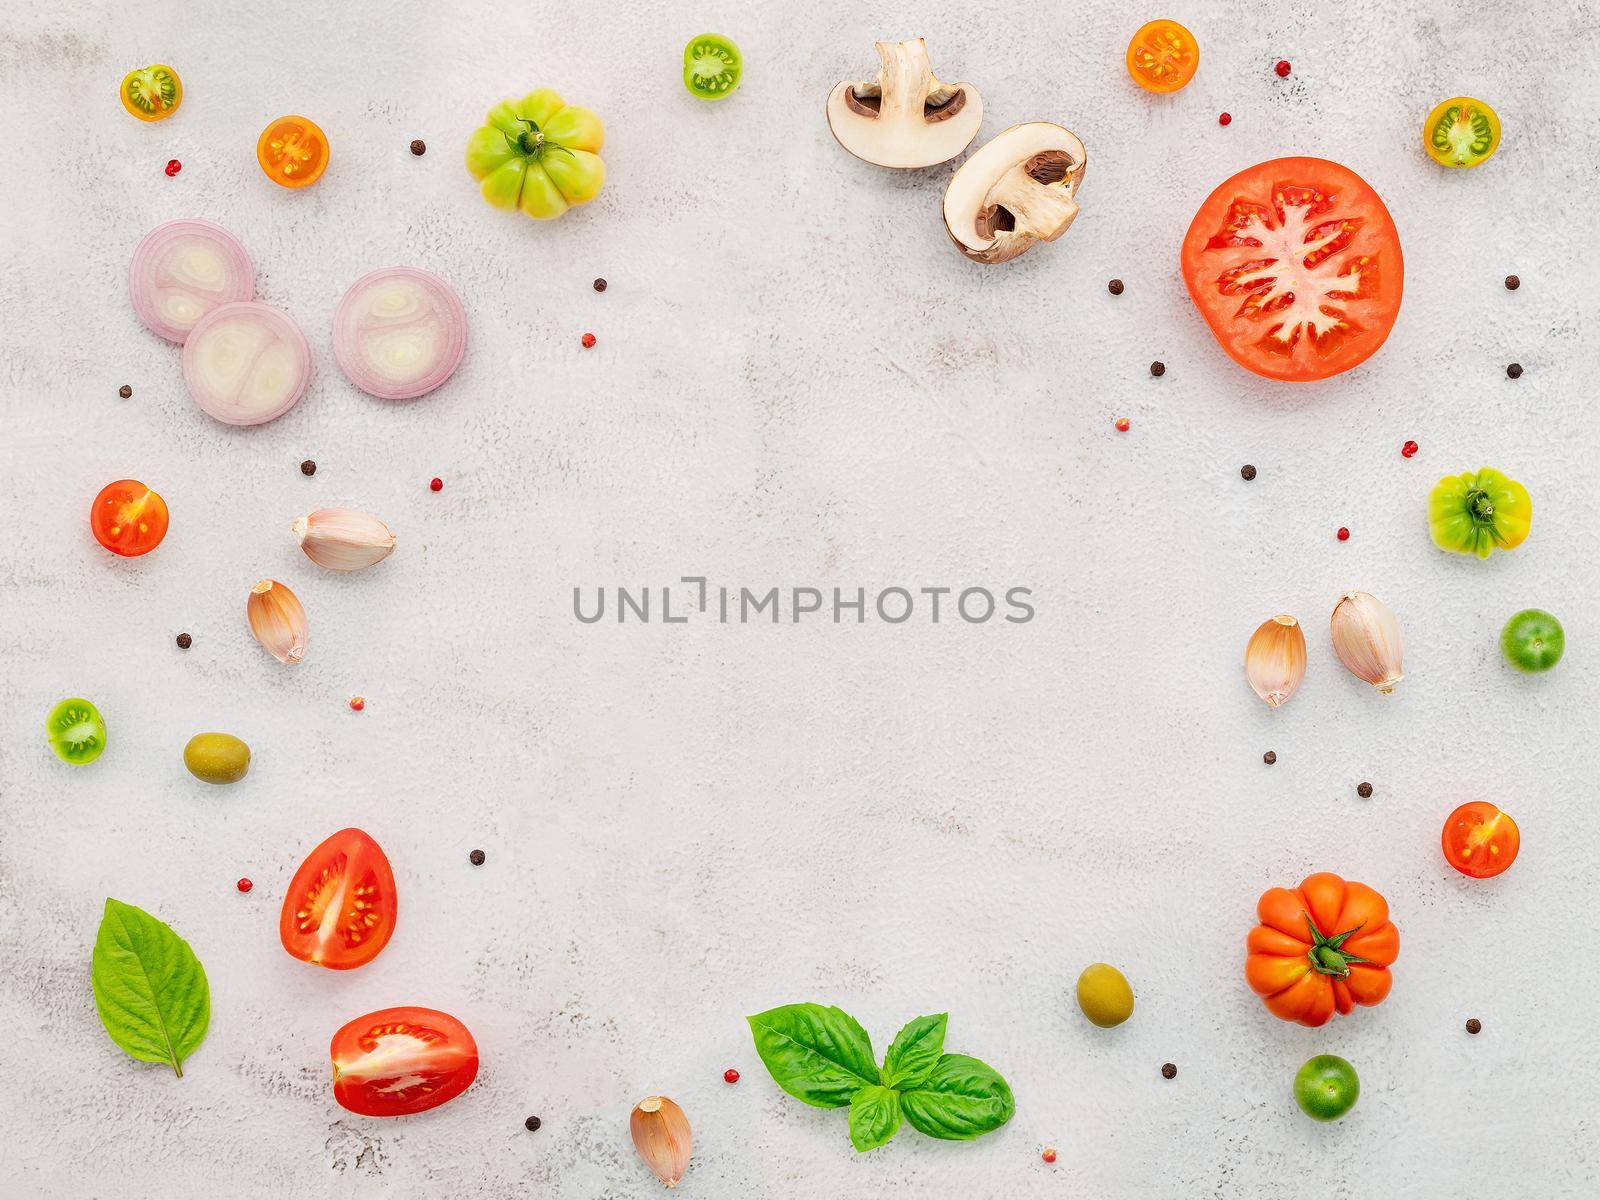 The ingredients for homemade pizza set up on white concrete background. by kerdkanno